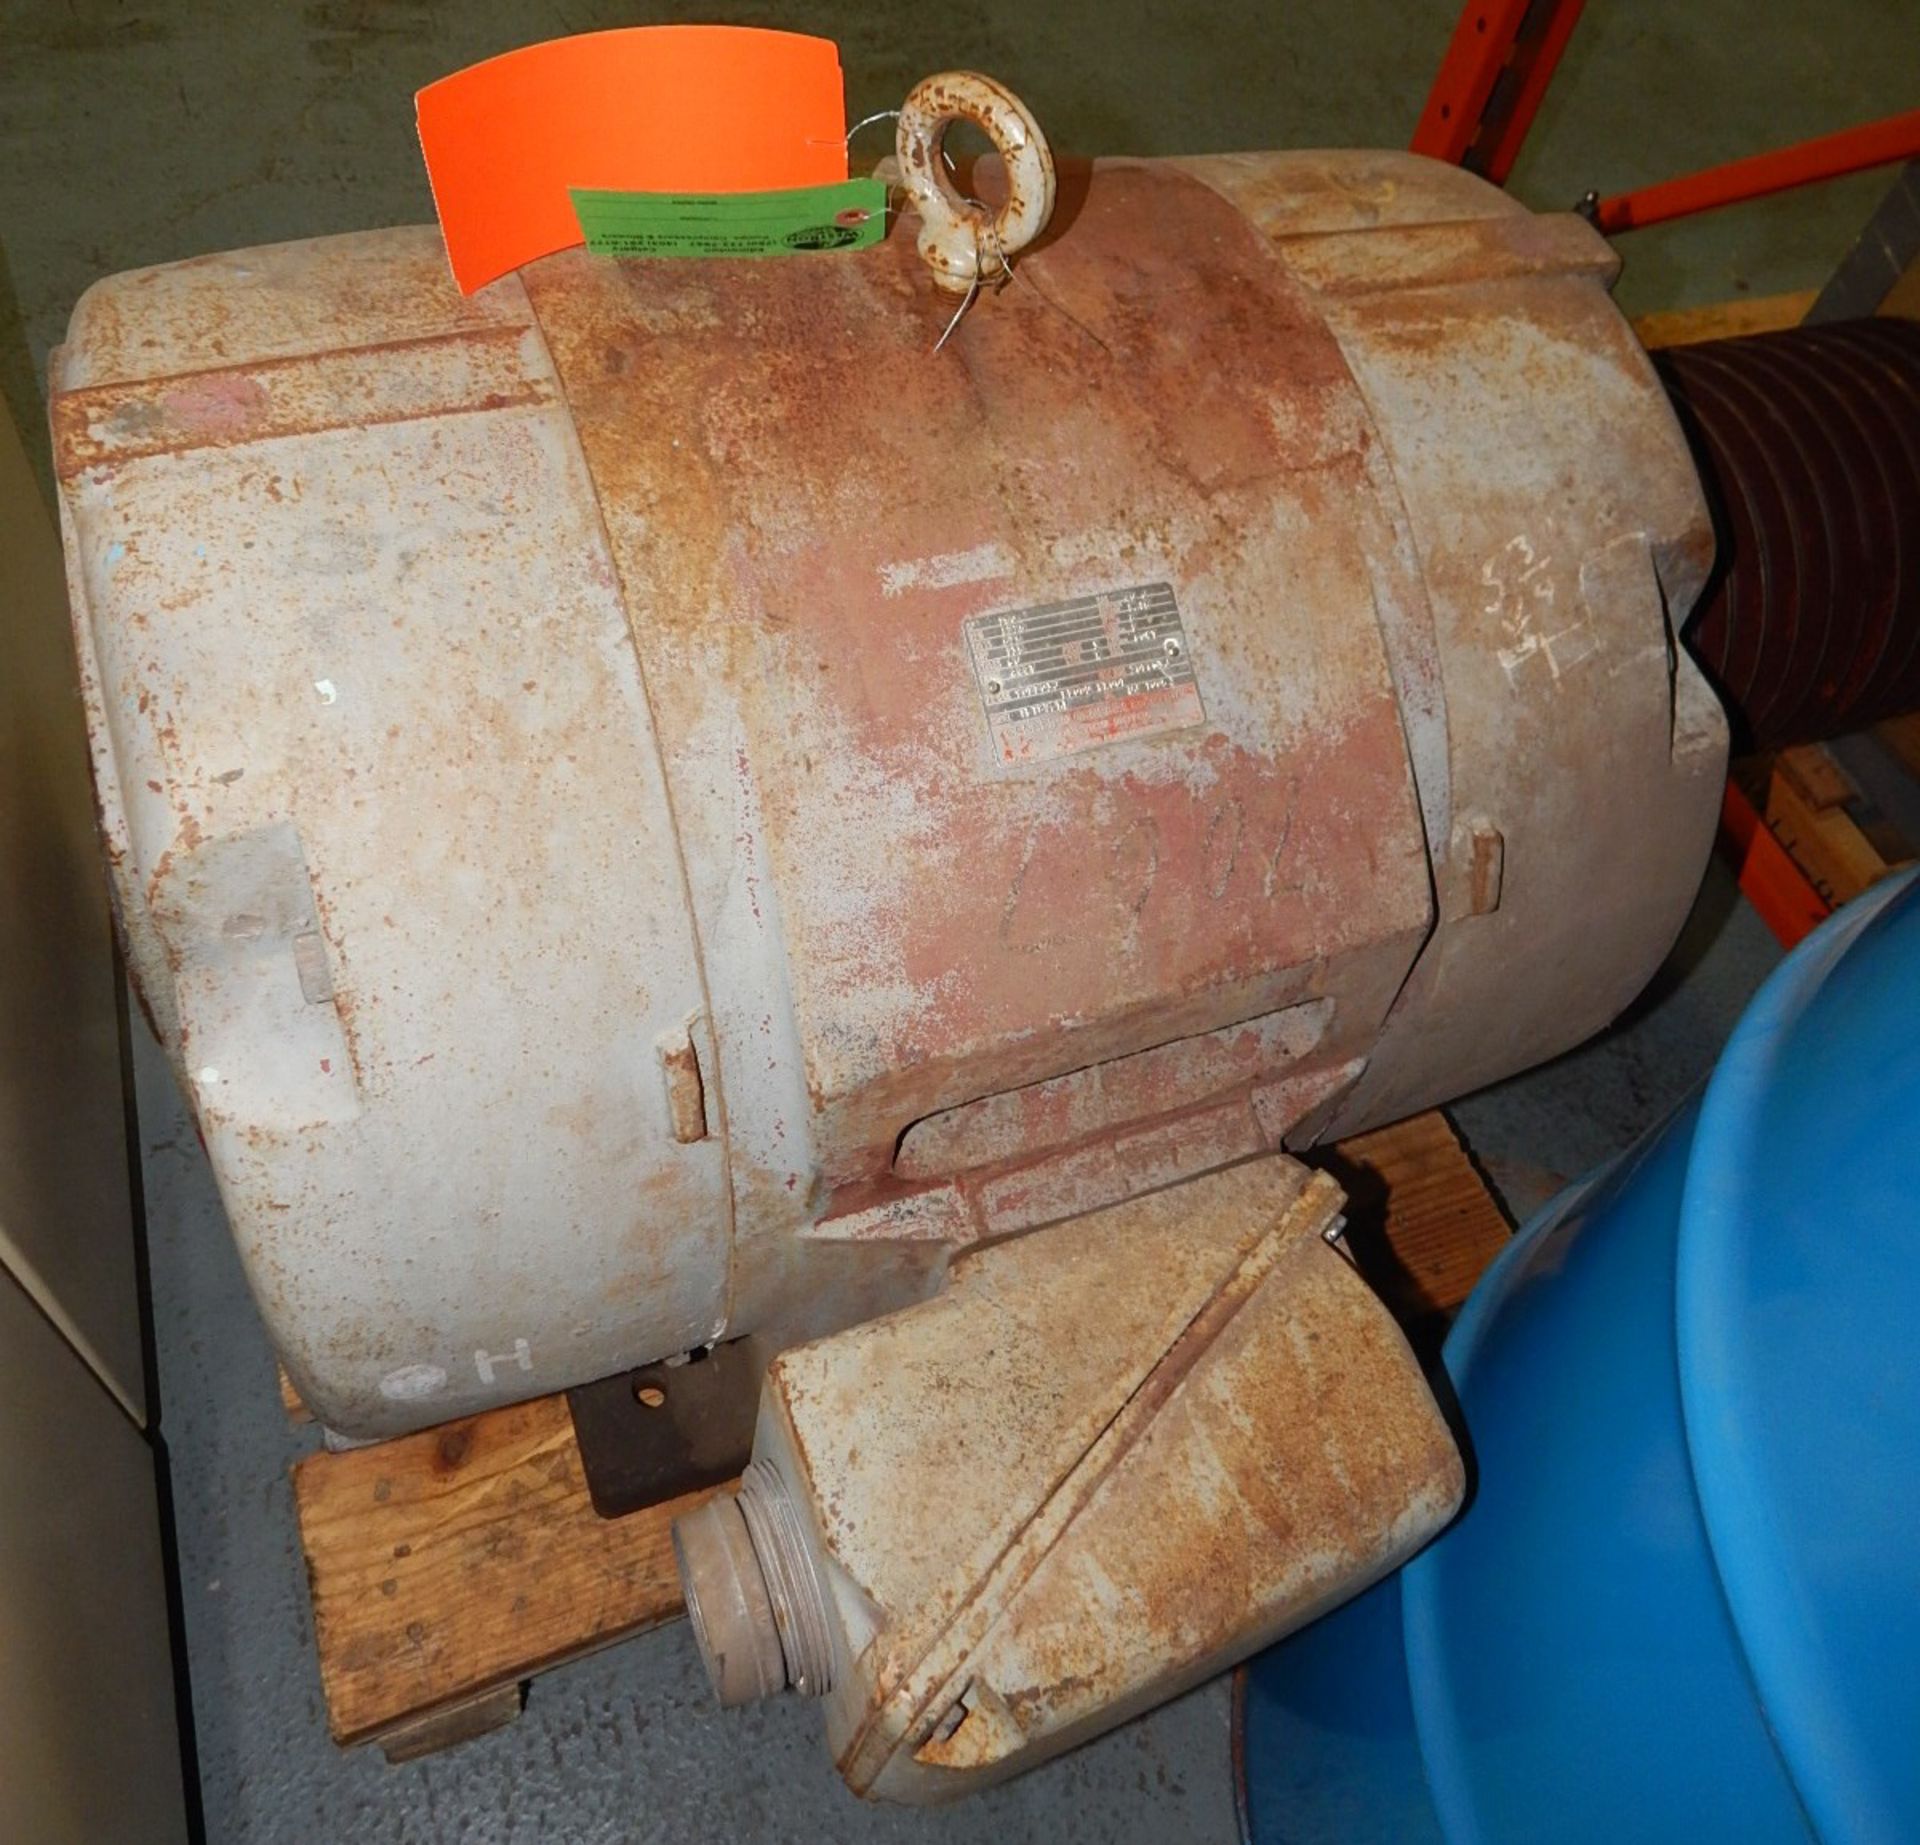 CANADIAN GENERAL ELECTRIC 150 HP ELECTRIC MOTOR WITH 1775 RPM, 575V, 3 PHASE, 60 HZ (CI) [RIGGING - Image 3 of 4